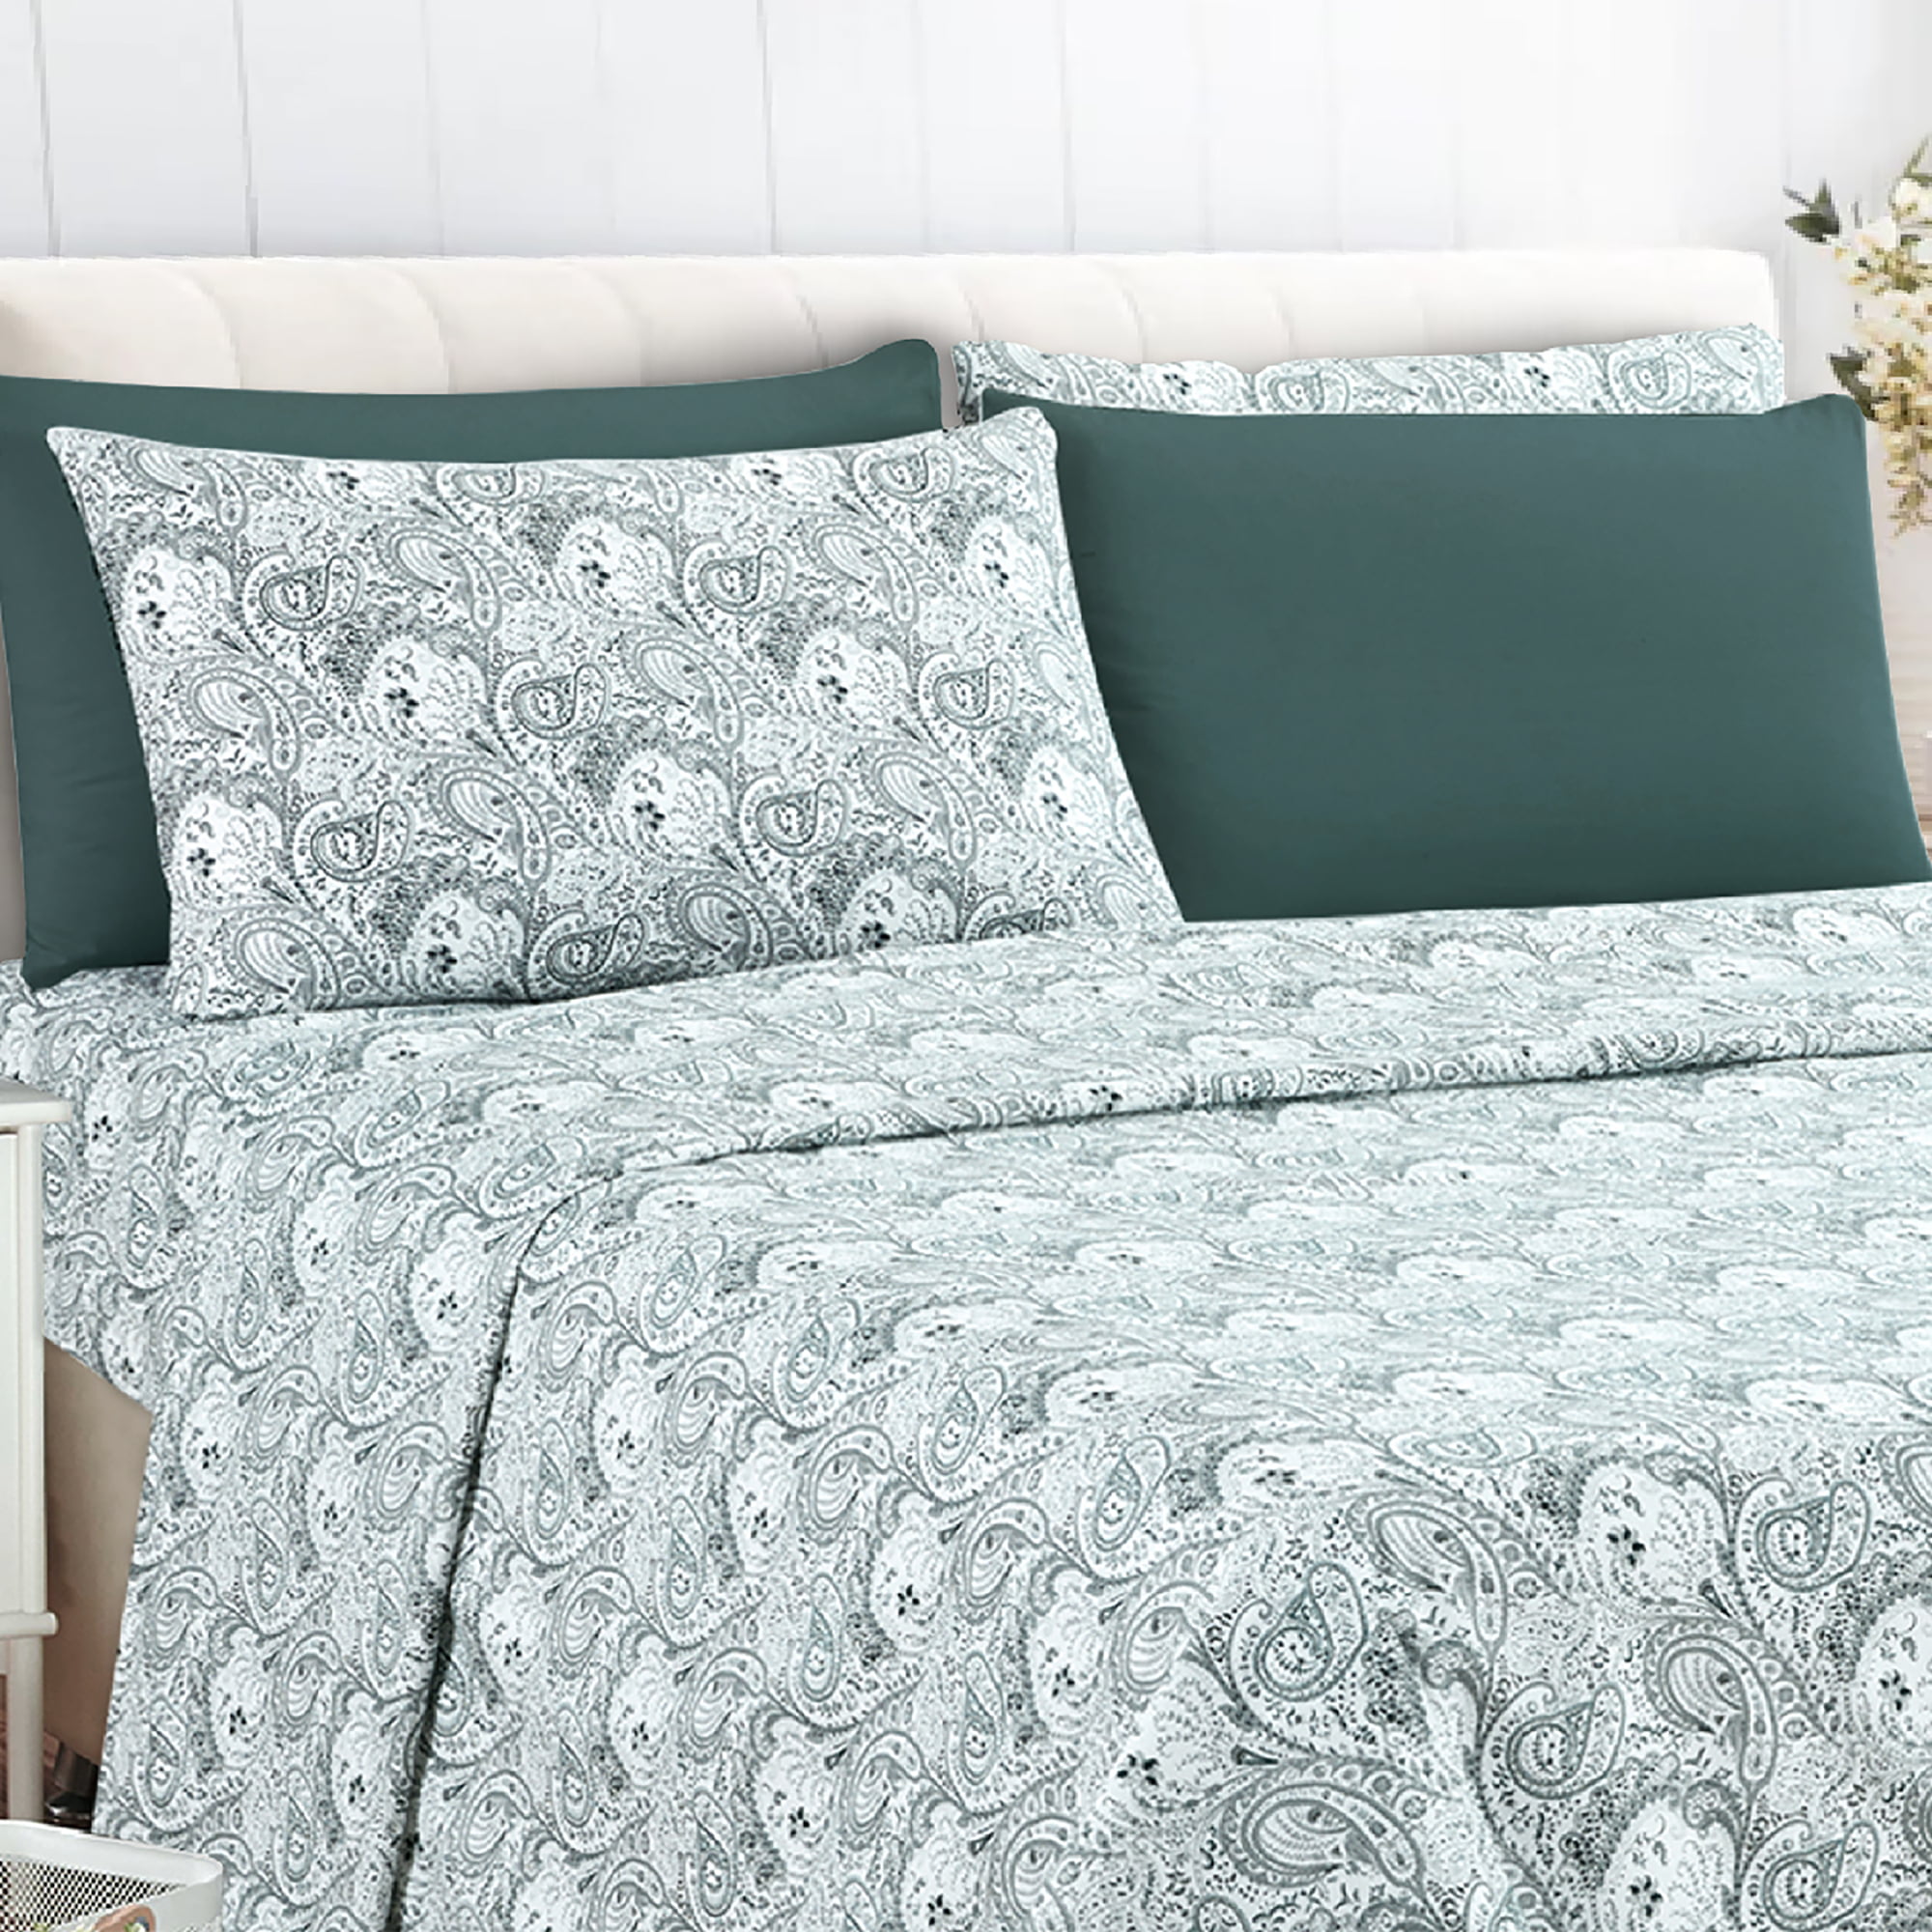 Details about   Comfy Bedding Collection Egyptian Cotton 1000 TC Sky Blue Solid Choose Item 